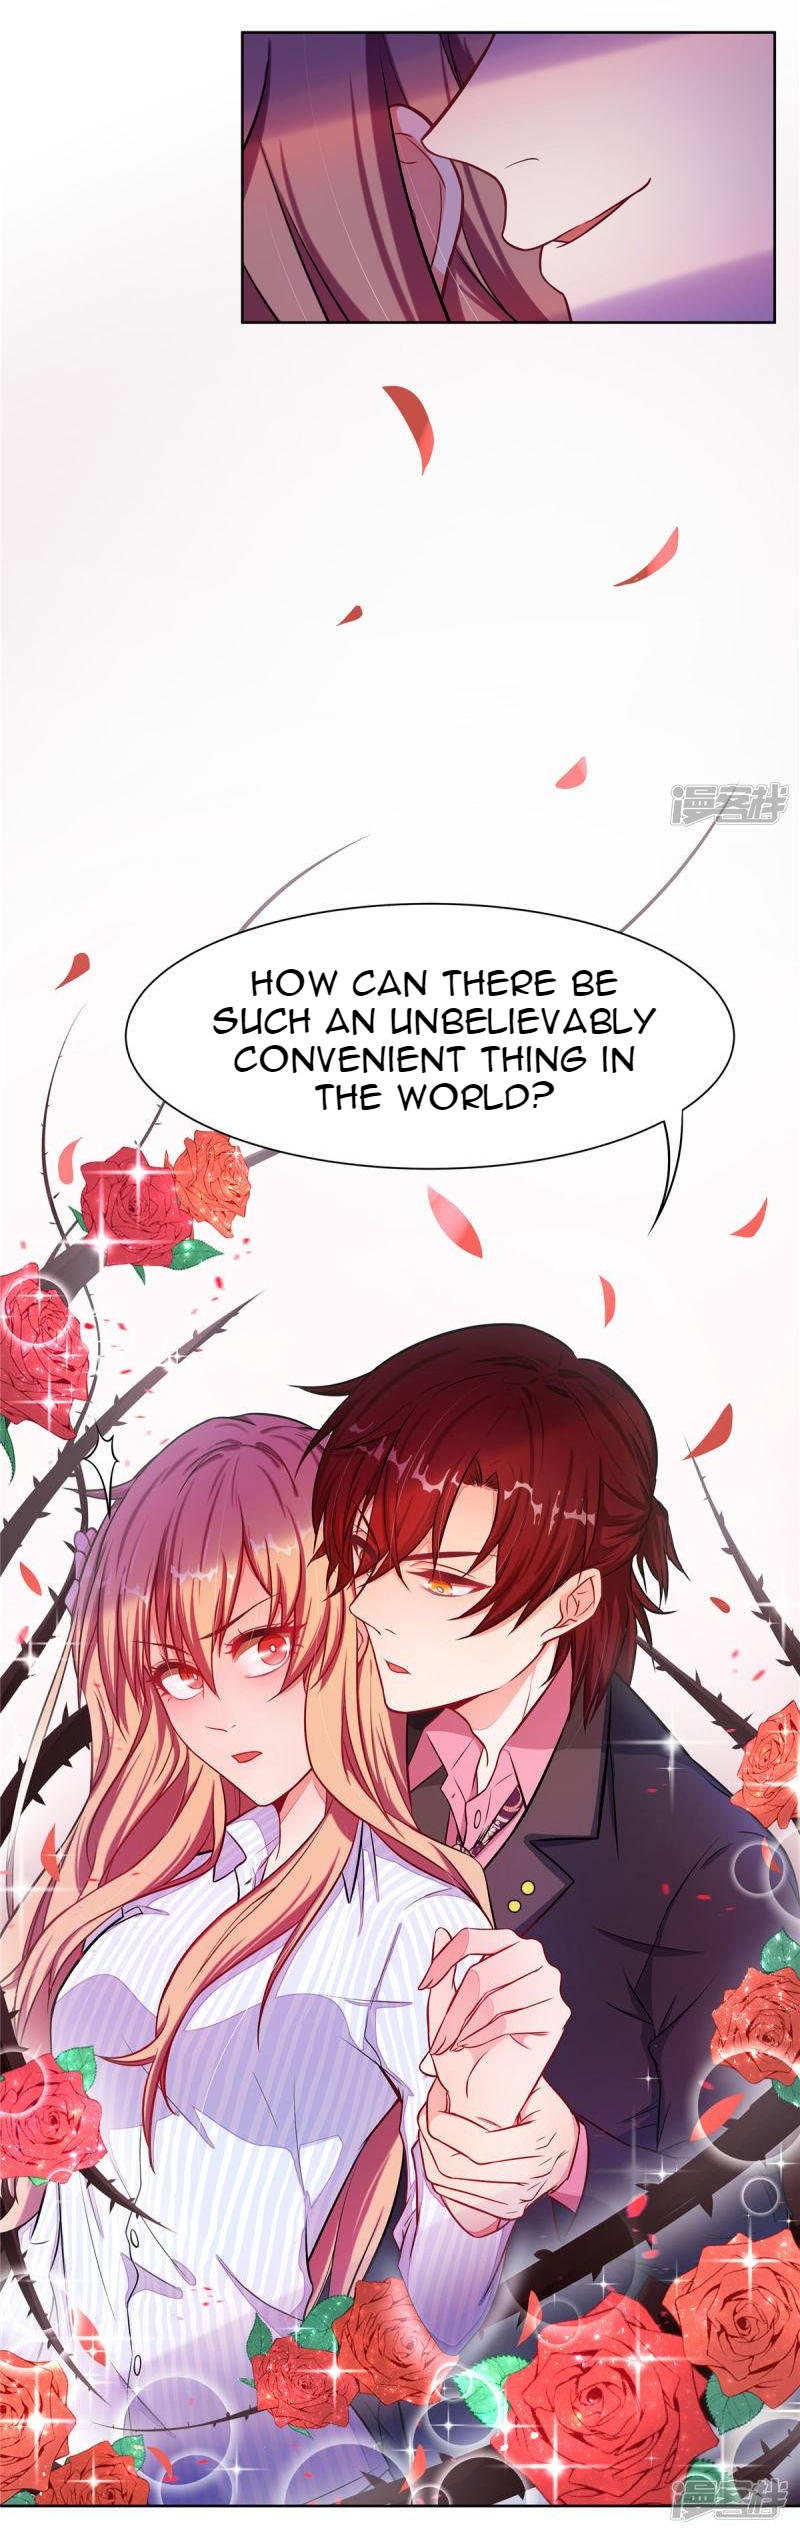 Rebirth of the Majestic Wife Ch. 5 Is There Something As Great As This in the World?